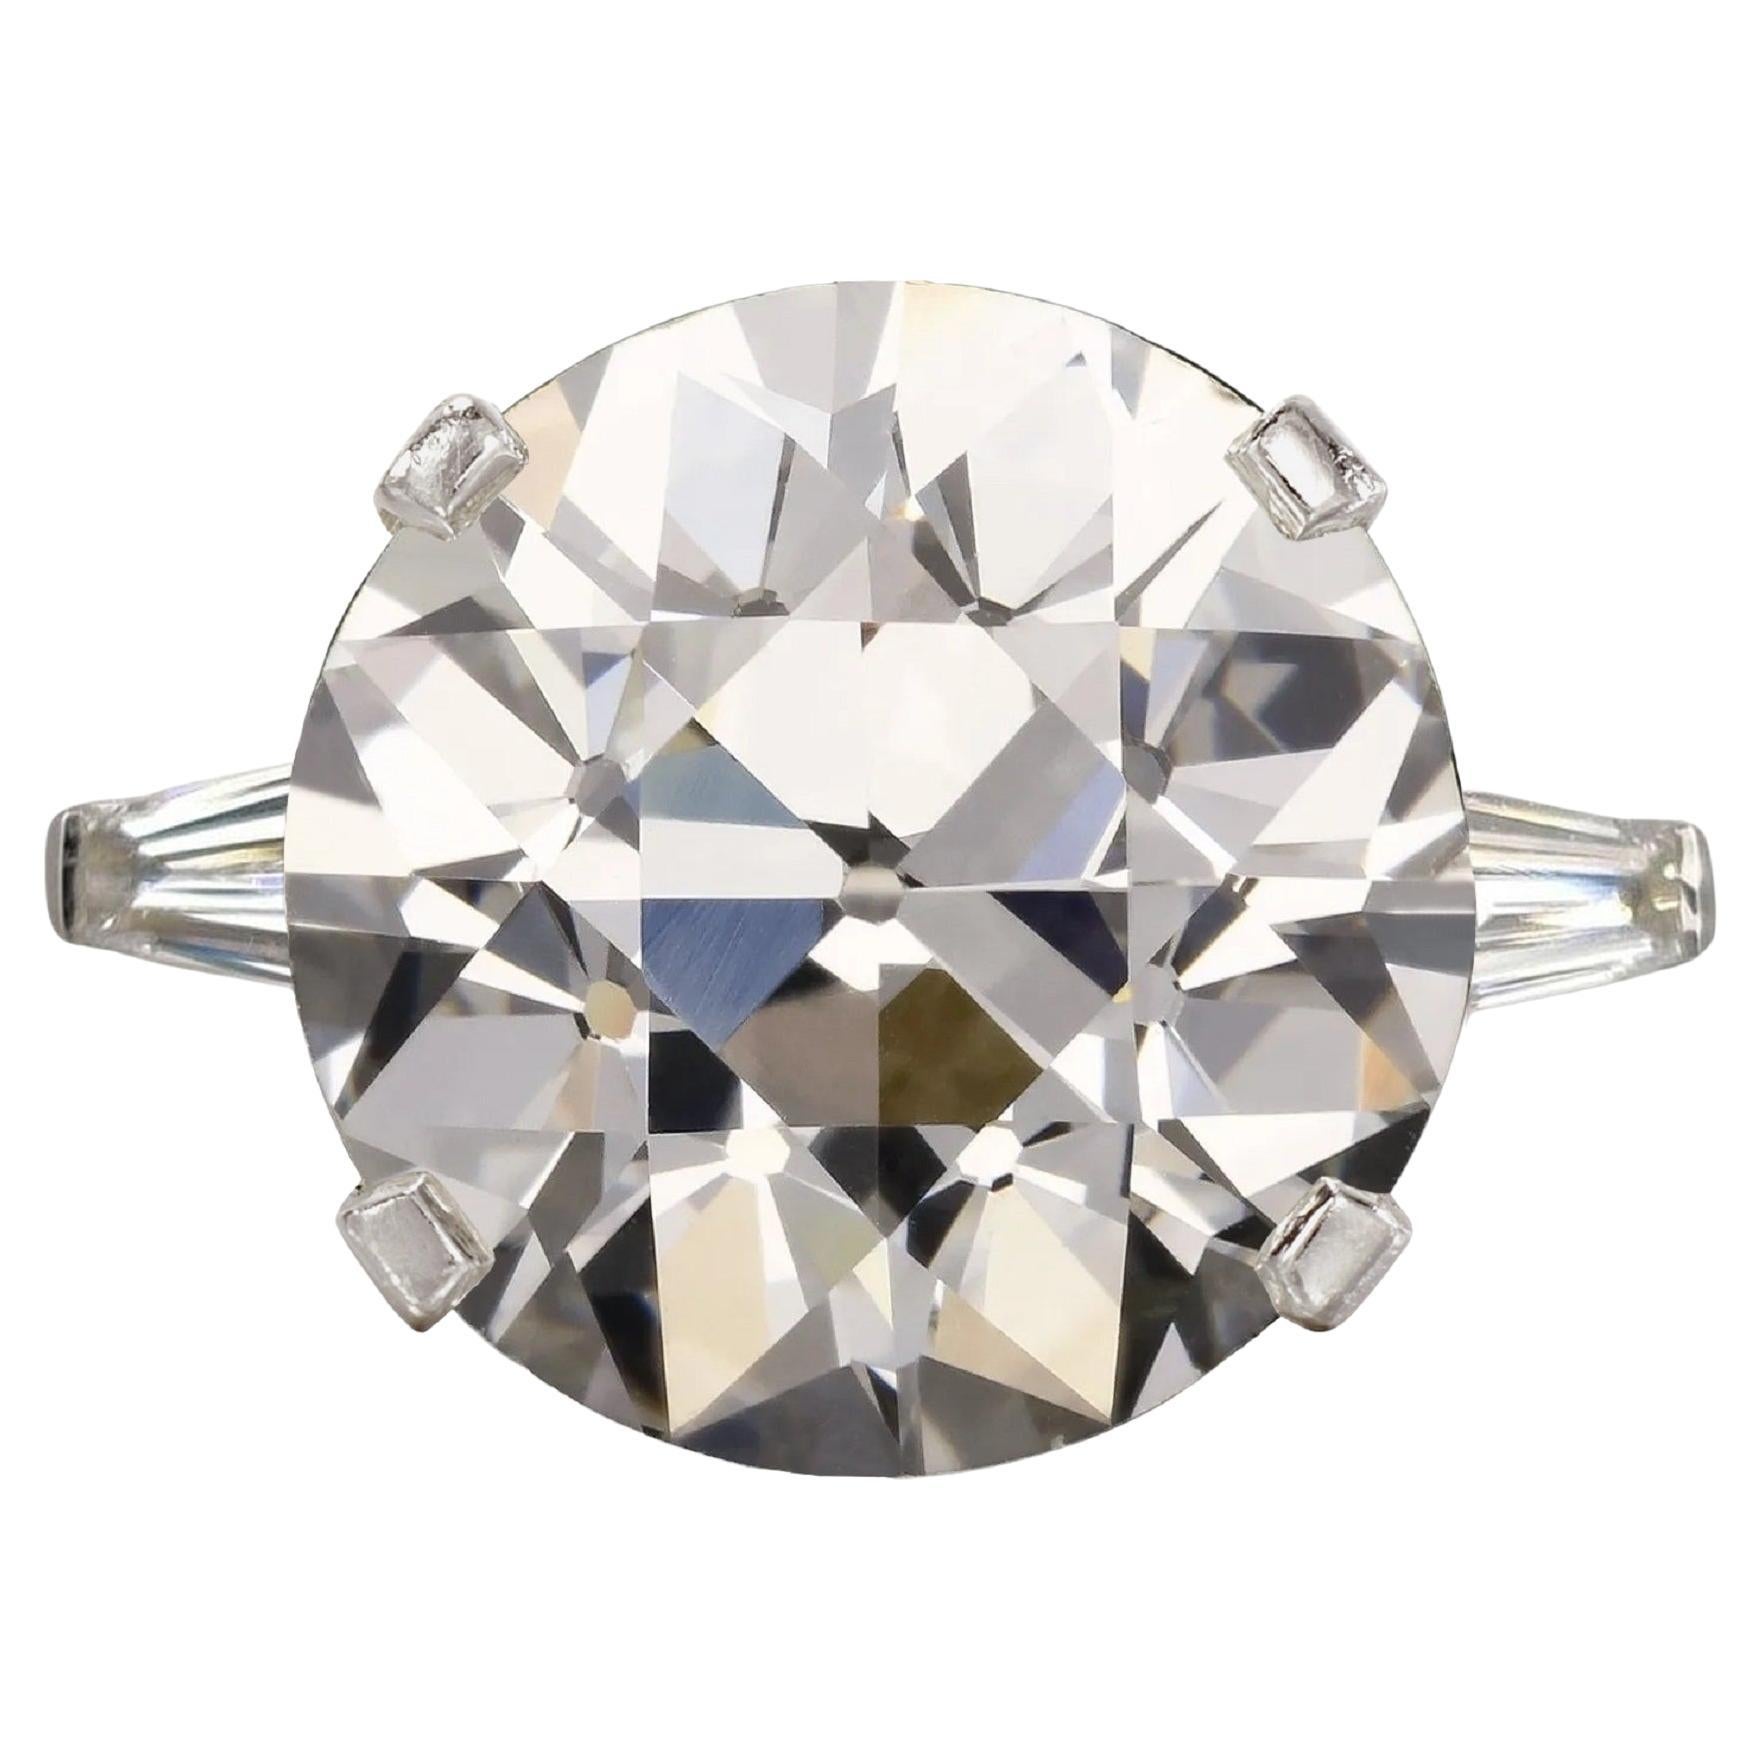 3.37ct old transitional cut certified diamond has exceptional VS1 clarity, stunning sparkle, and jaw dropping size! Bridging the gap between old cuts and modern round brilliants, old transitional cut diamonds were produced for a very short period of